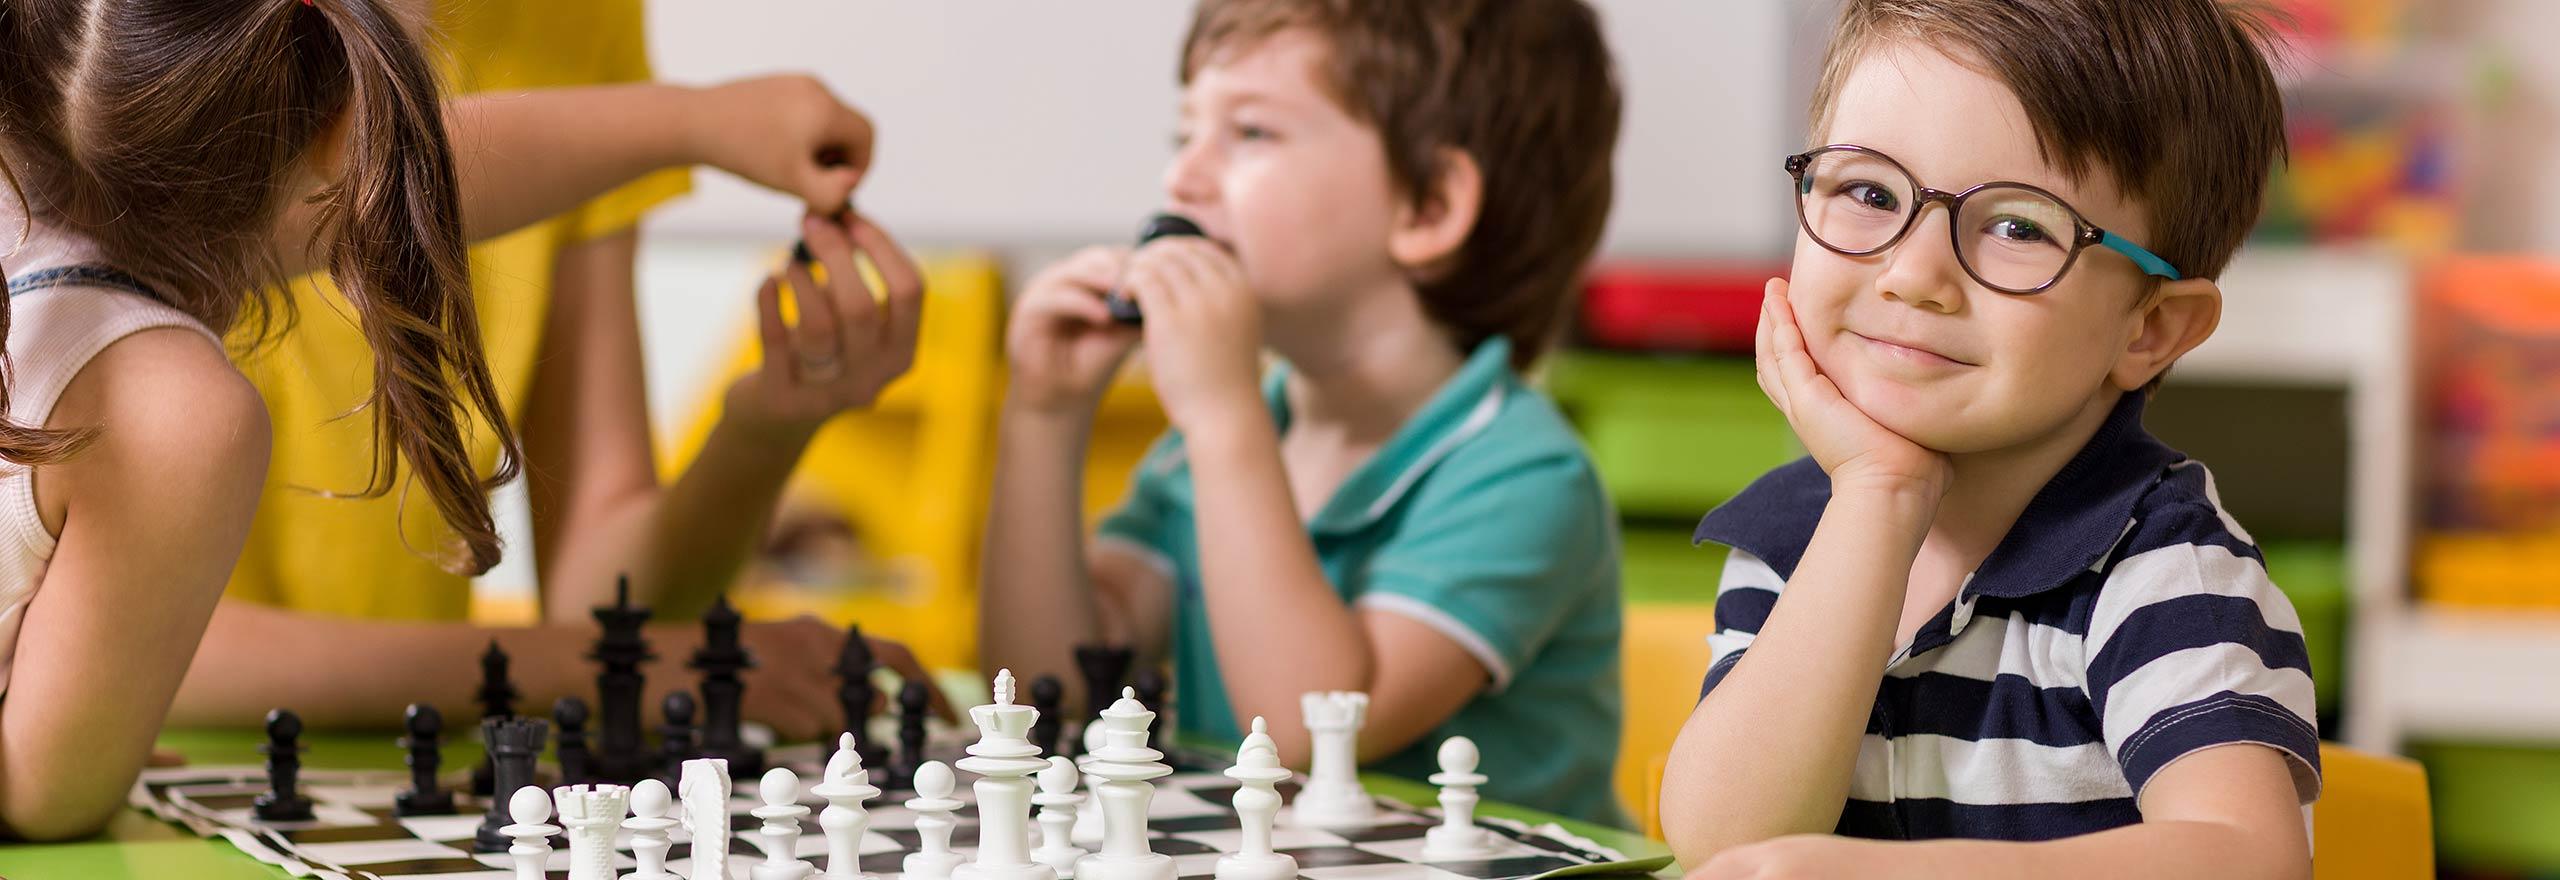 Kings, pawns and little citizens: the island where children love chess, Europe